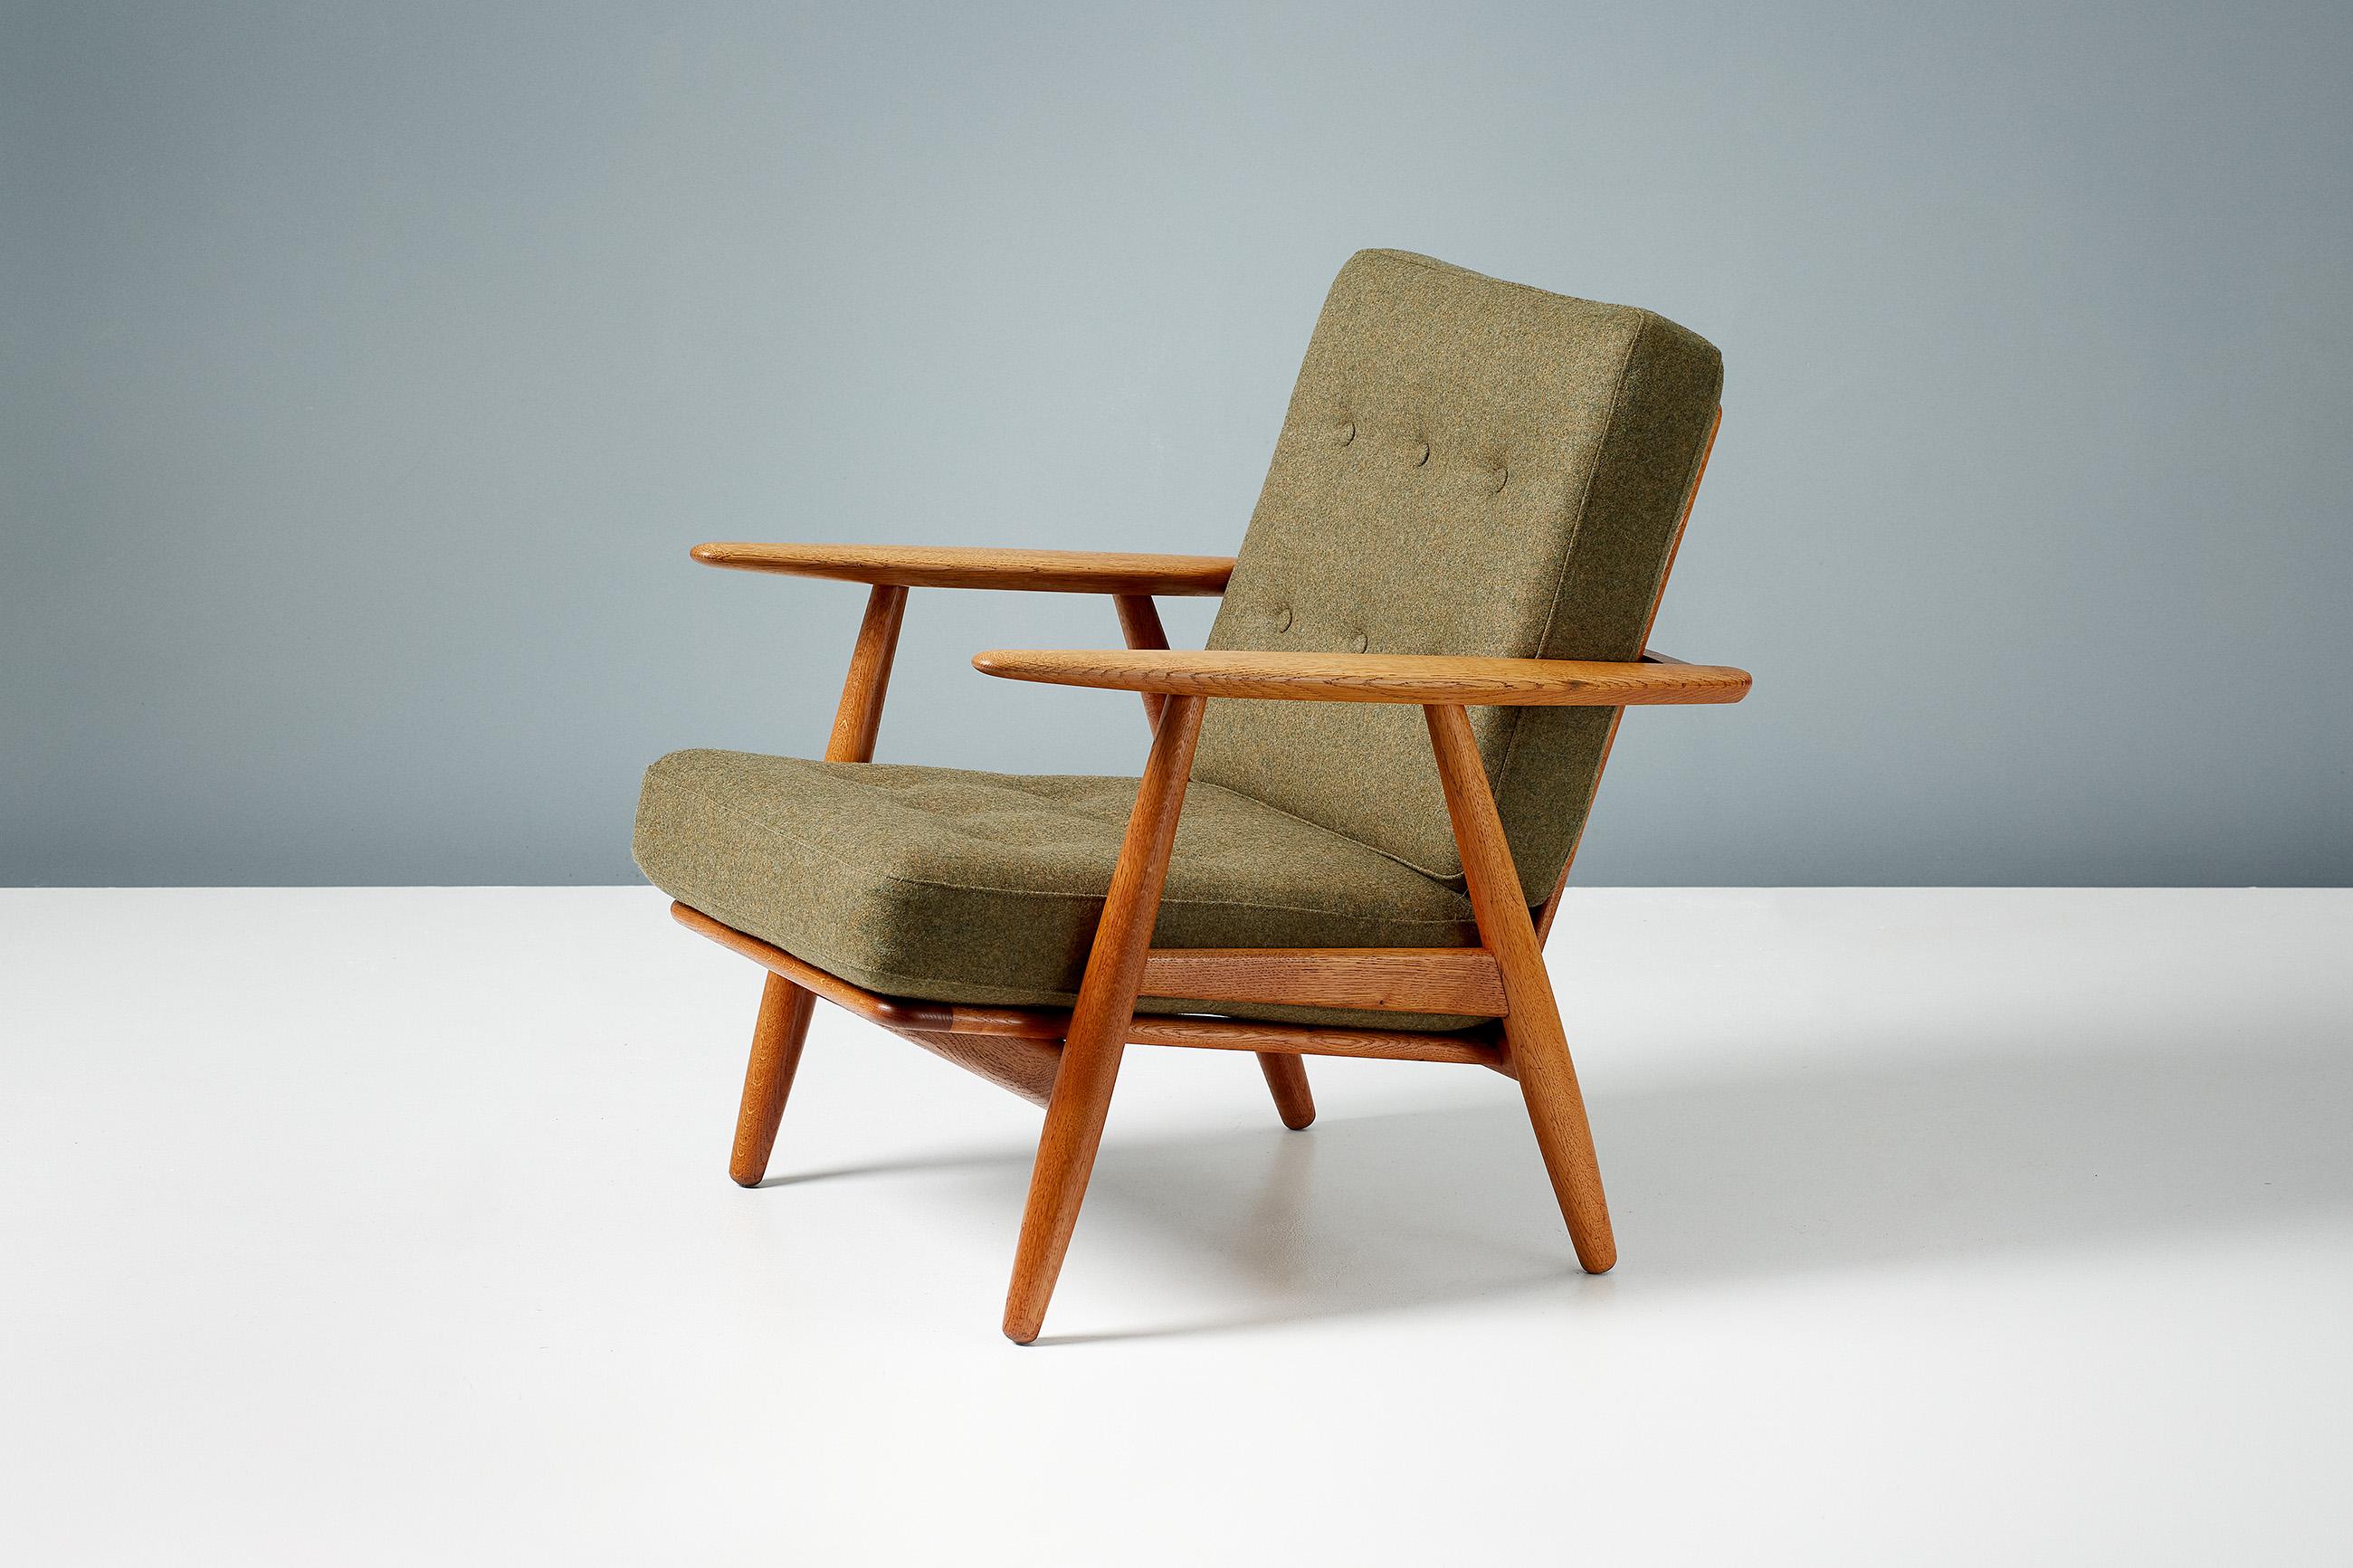 Hans J. Wegner

Pair of GE-240 Cigar chairs, 1955

Produced by GETAMA in Gedsted, Denmark in the 1950s. These examples of Wegner's iconic lounge chair are made from European oak frame with the original sprung cushions reupholstered in fern green